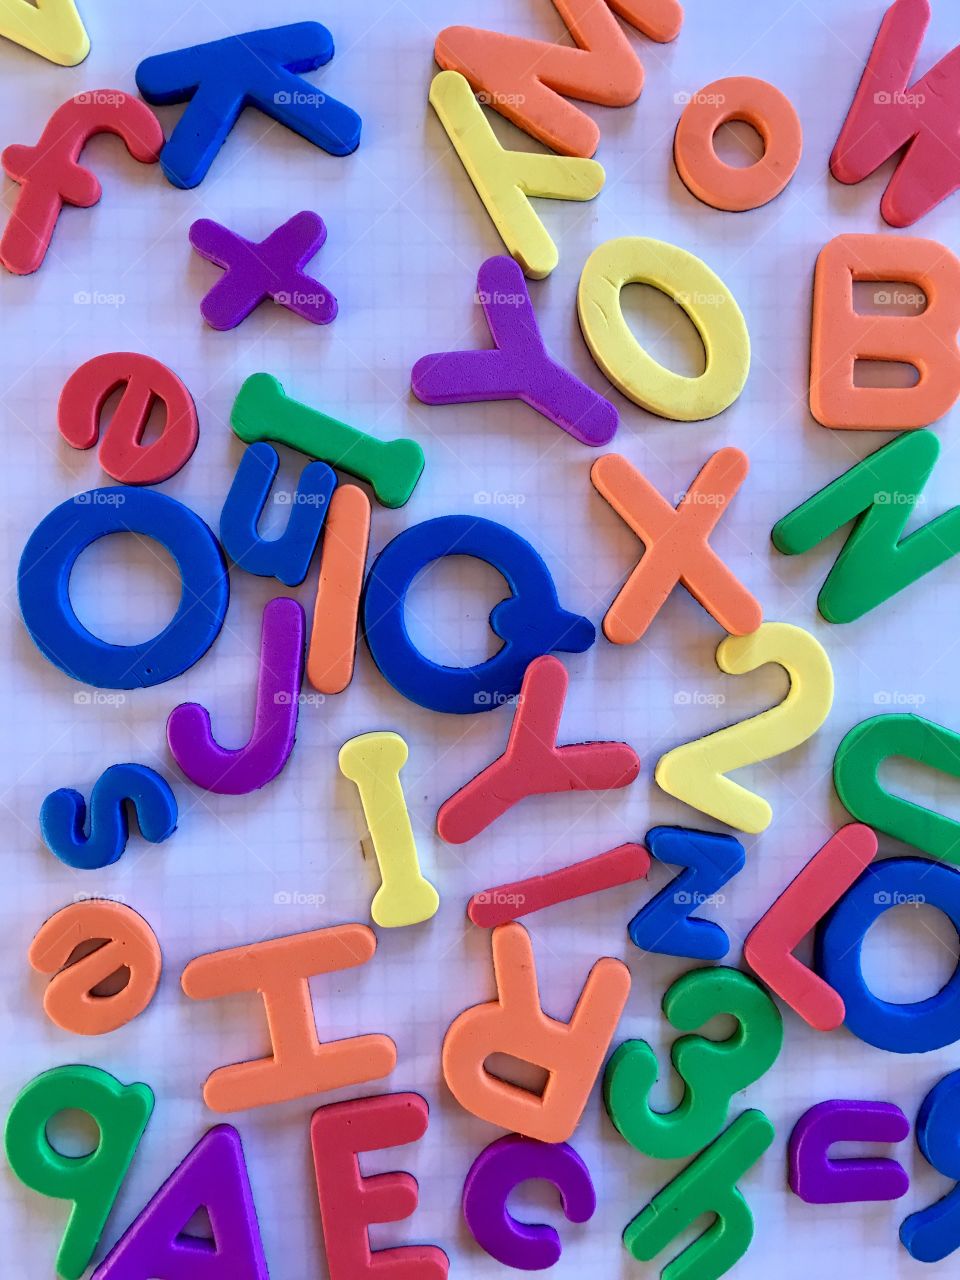 Craft letters and numbers